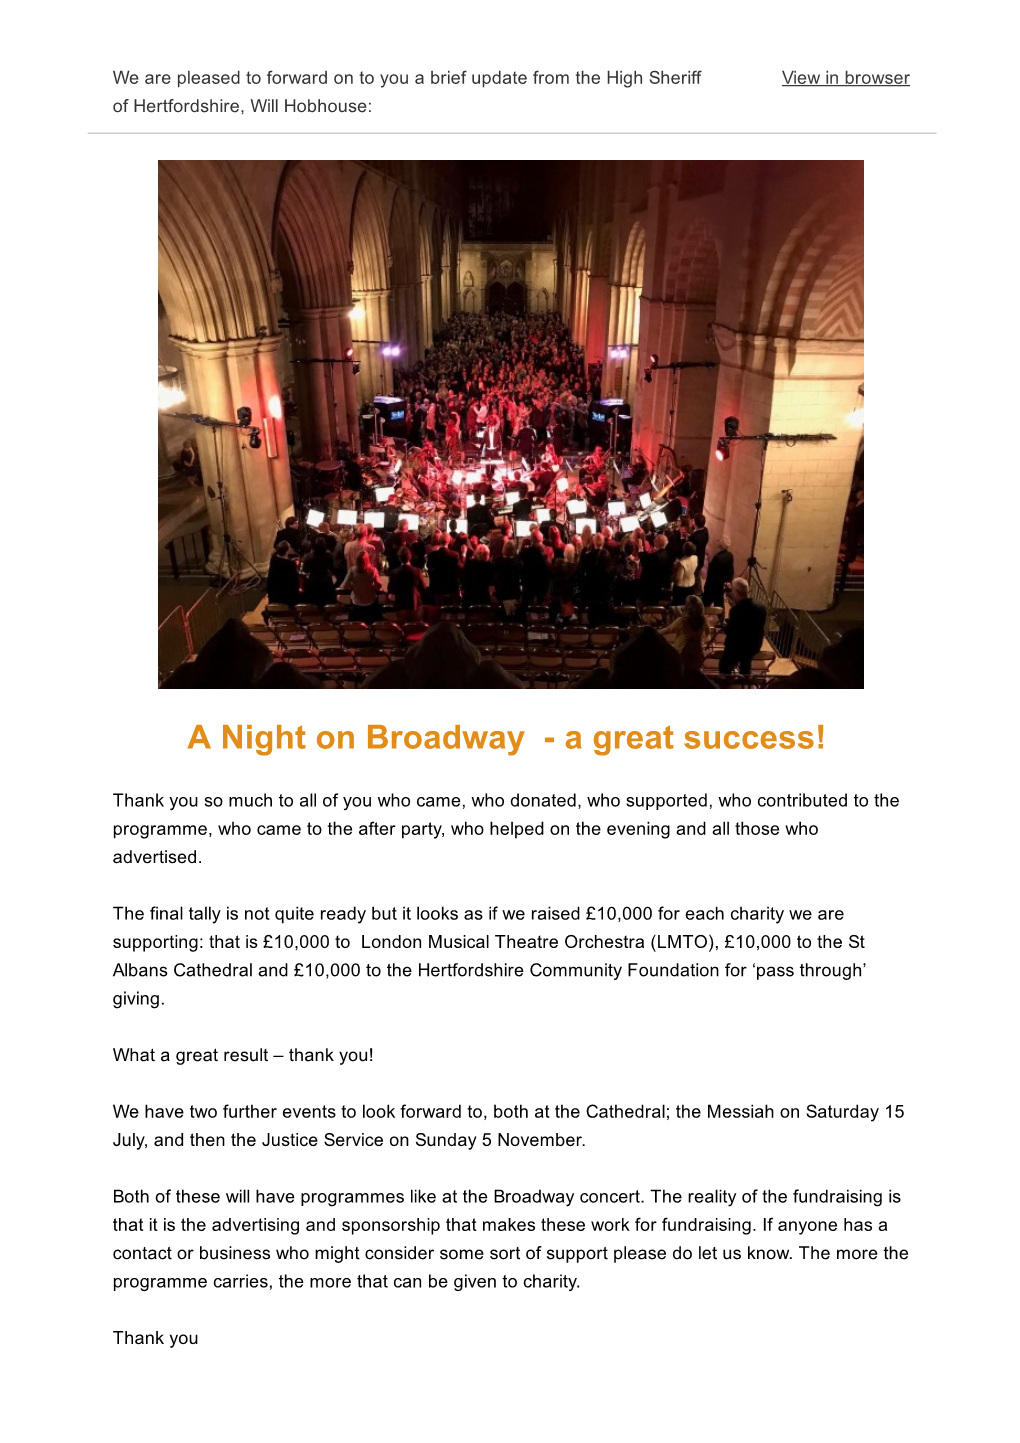 A Night on Broadway a Great Success!